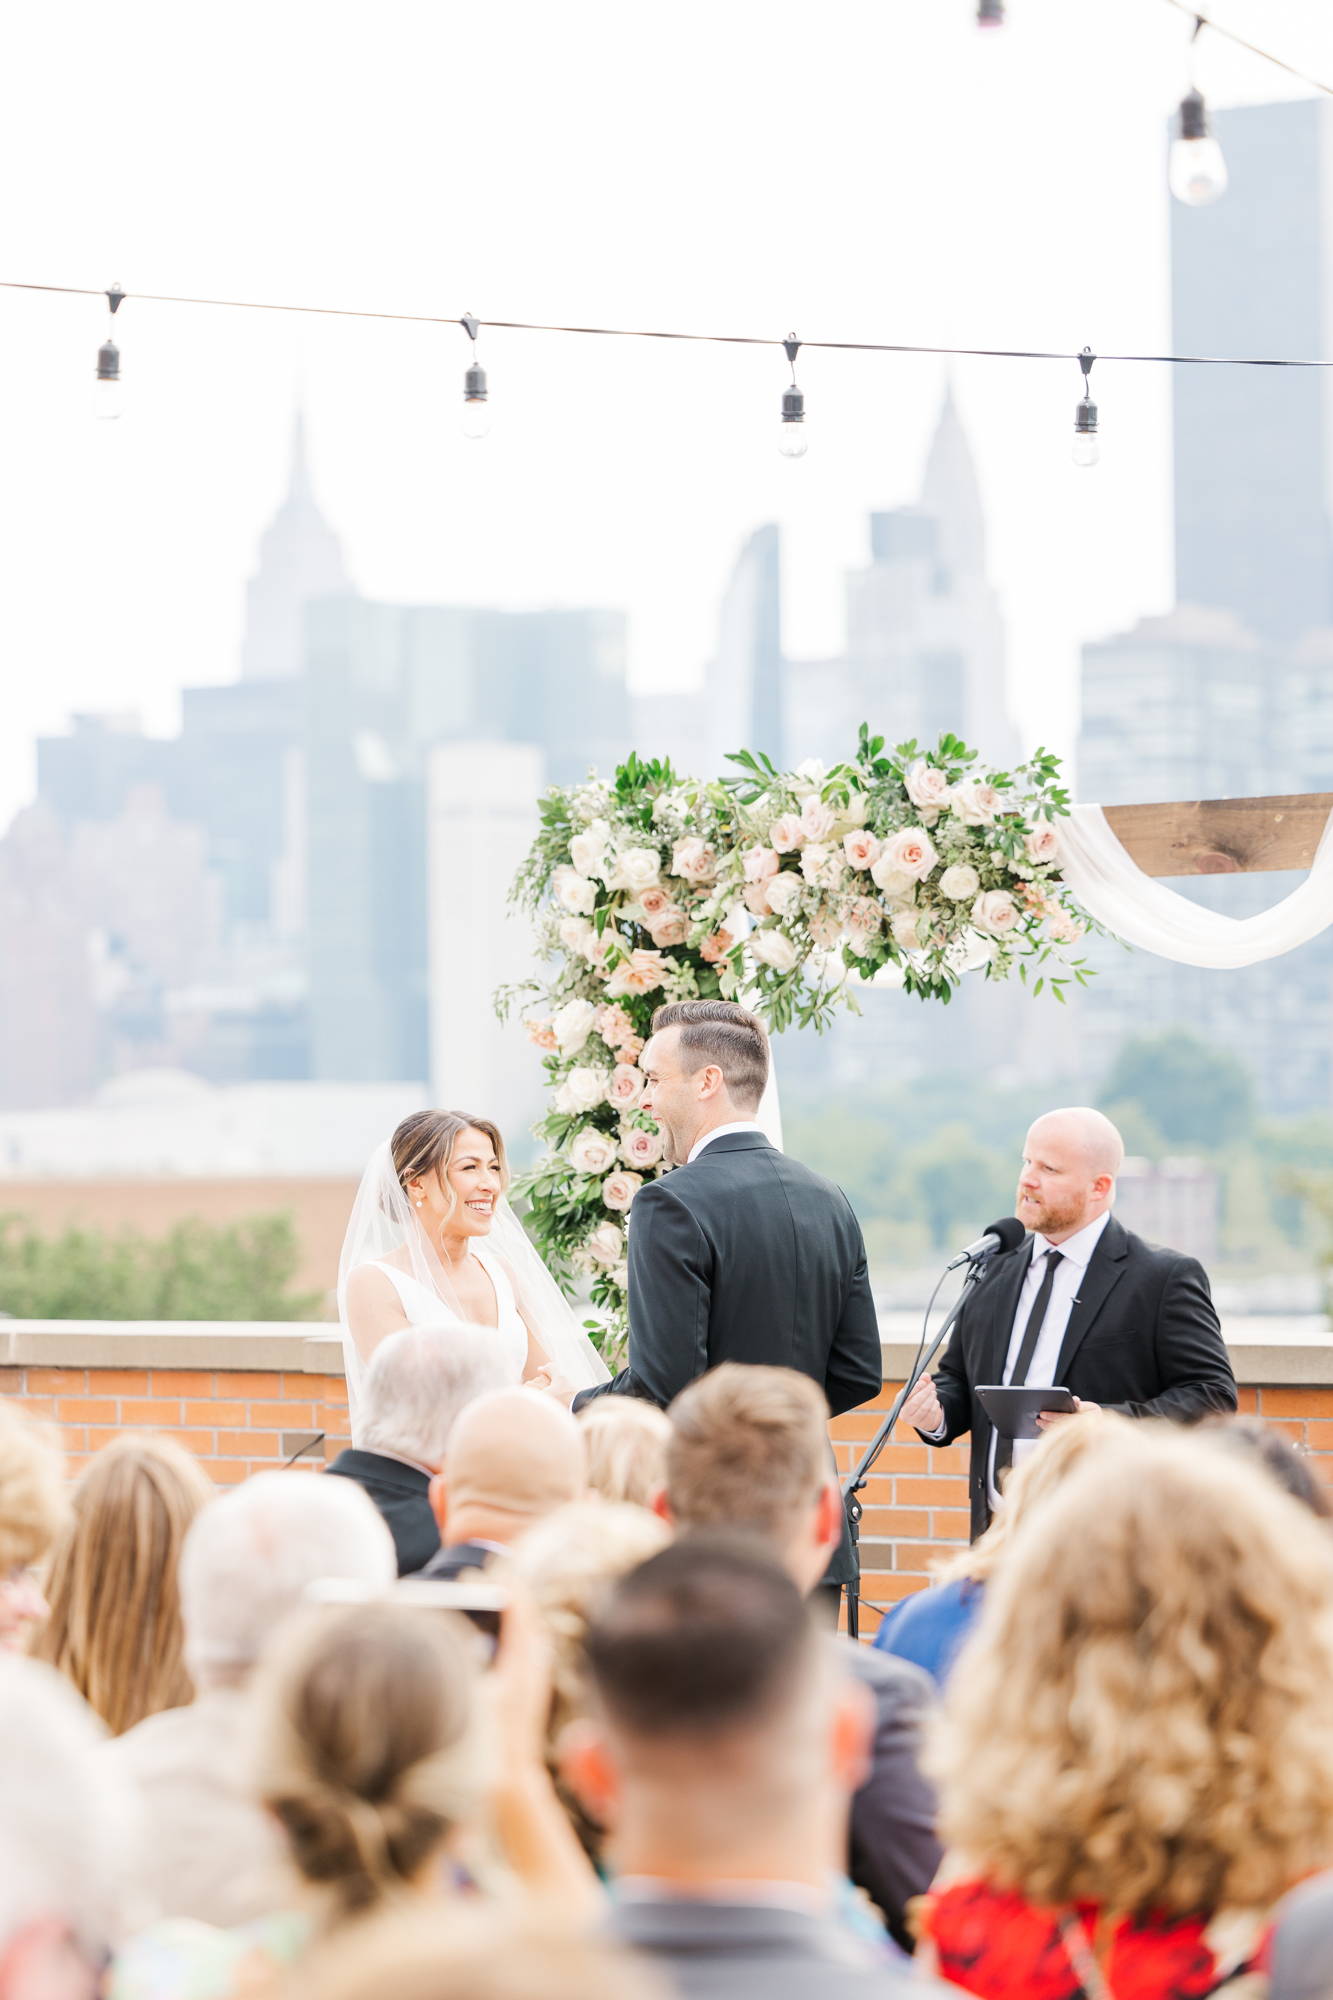 Perfect Wedding at The Bordone, Queens NY